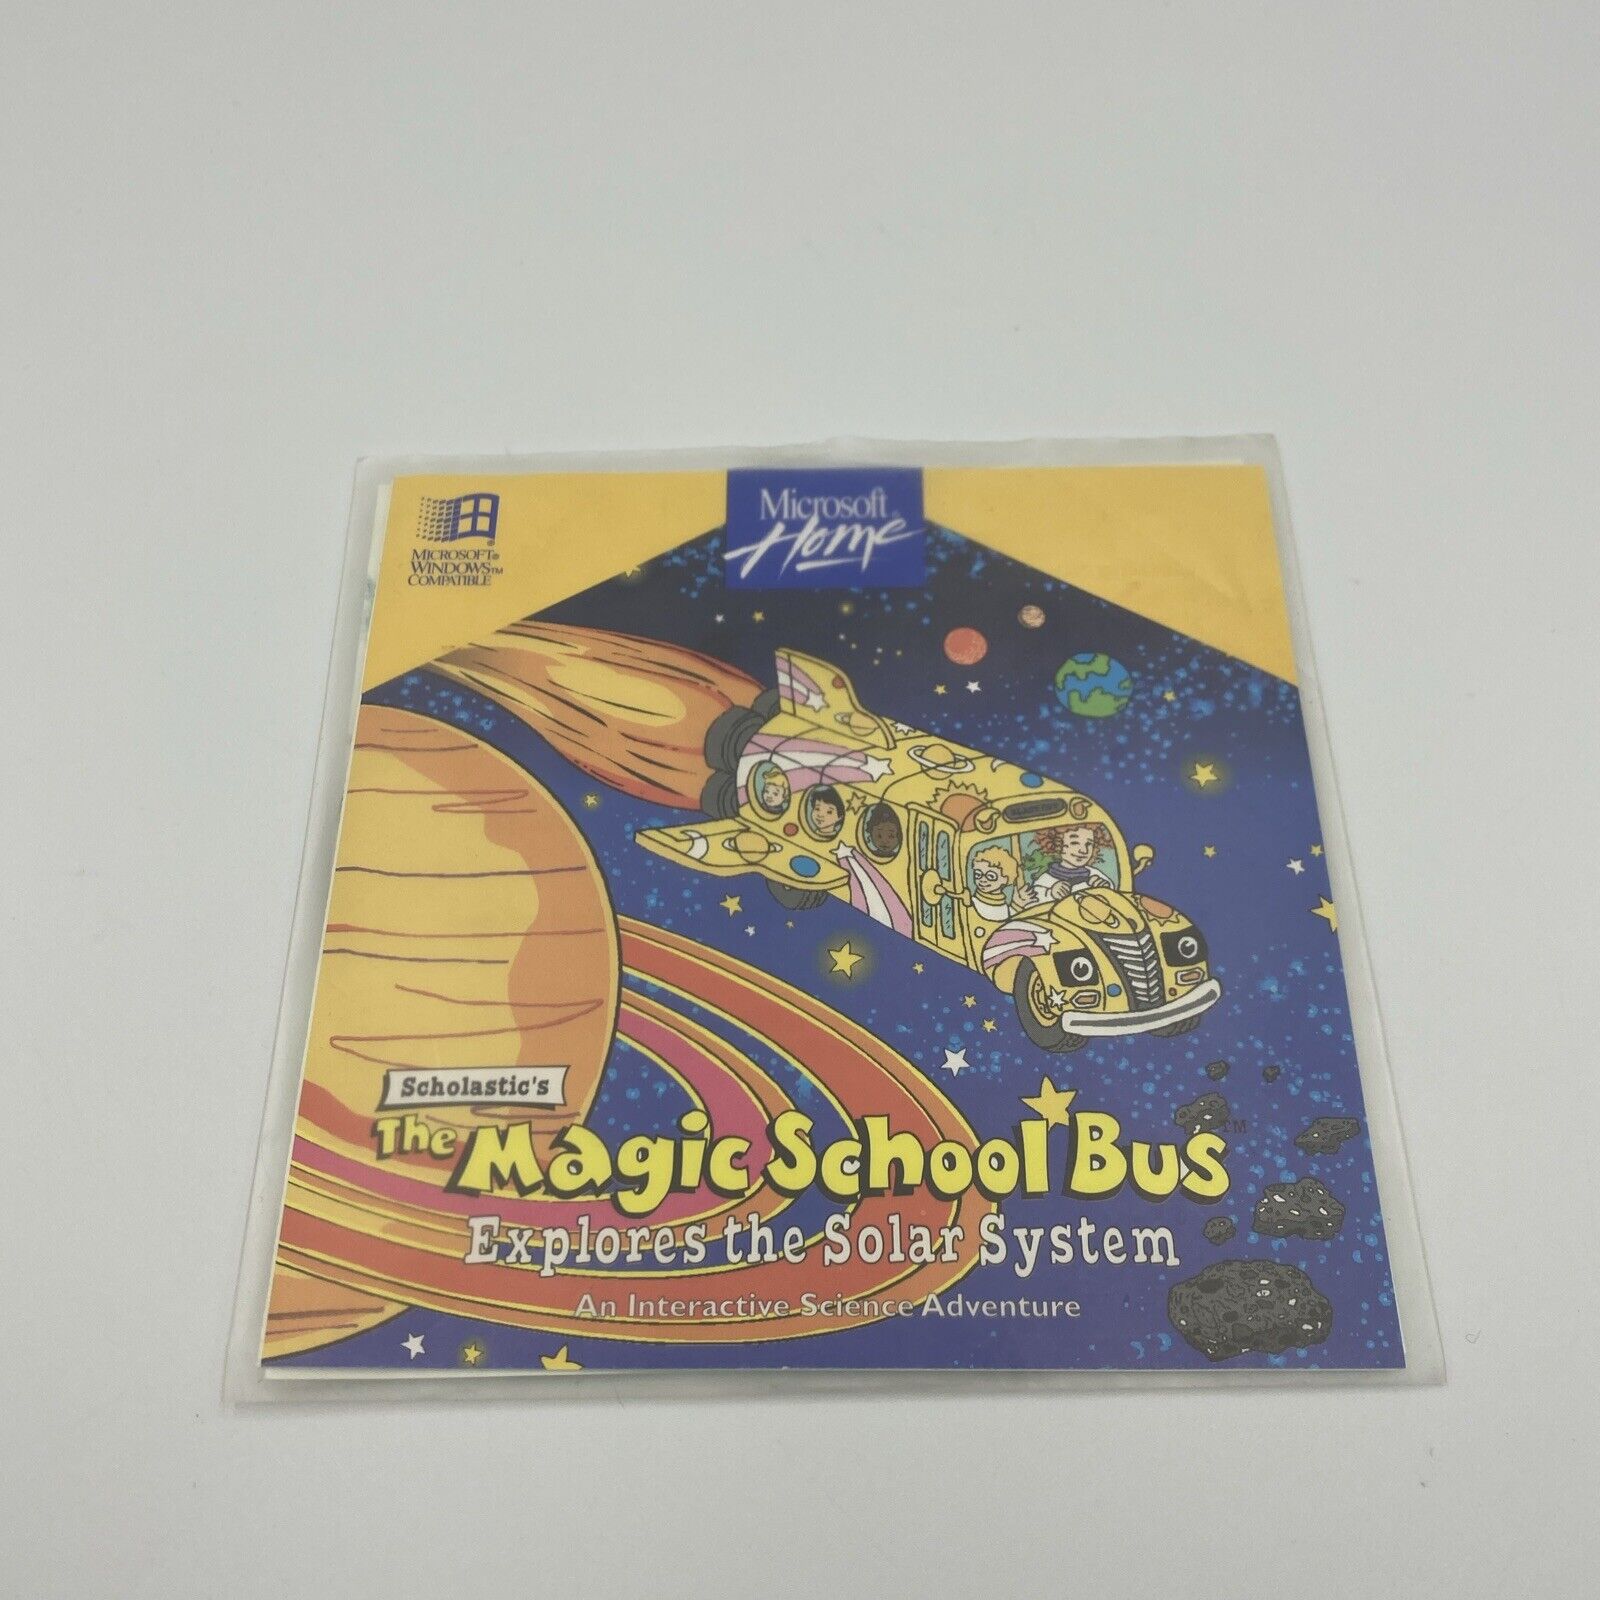 The Magic School Bus Explores The Solar System For Distribution Of New PC Rare